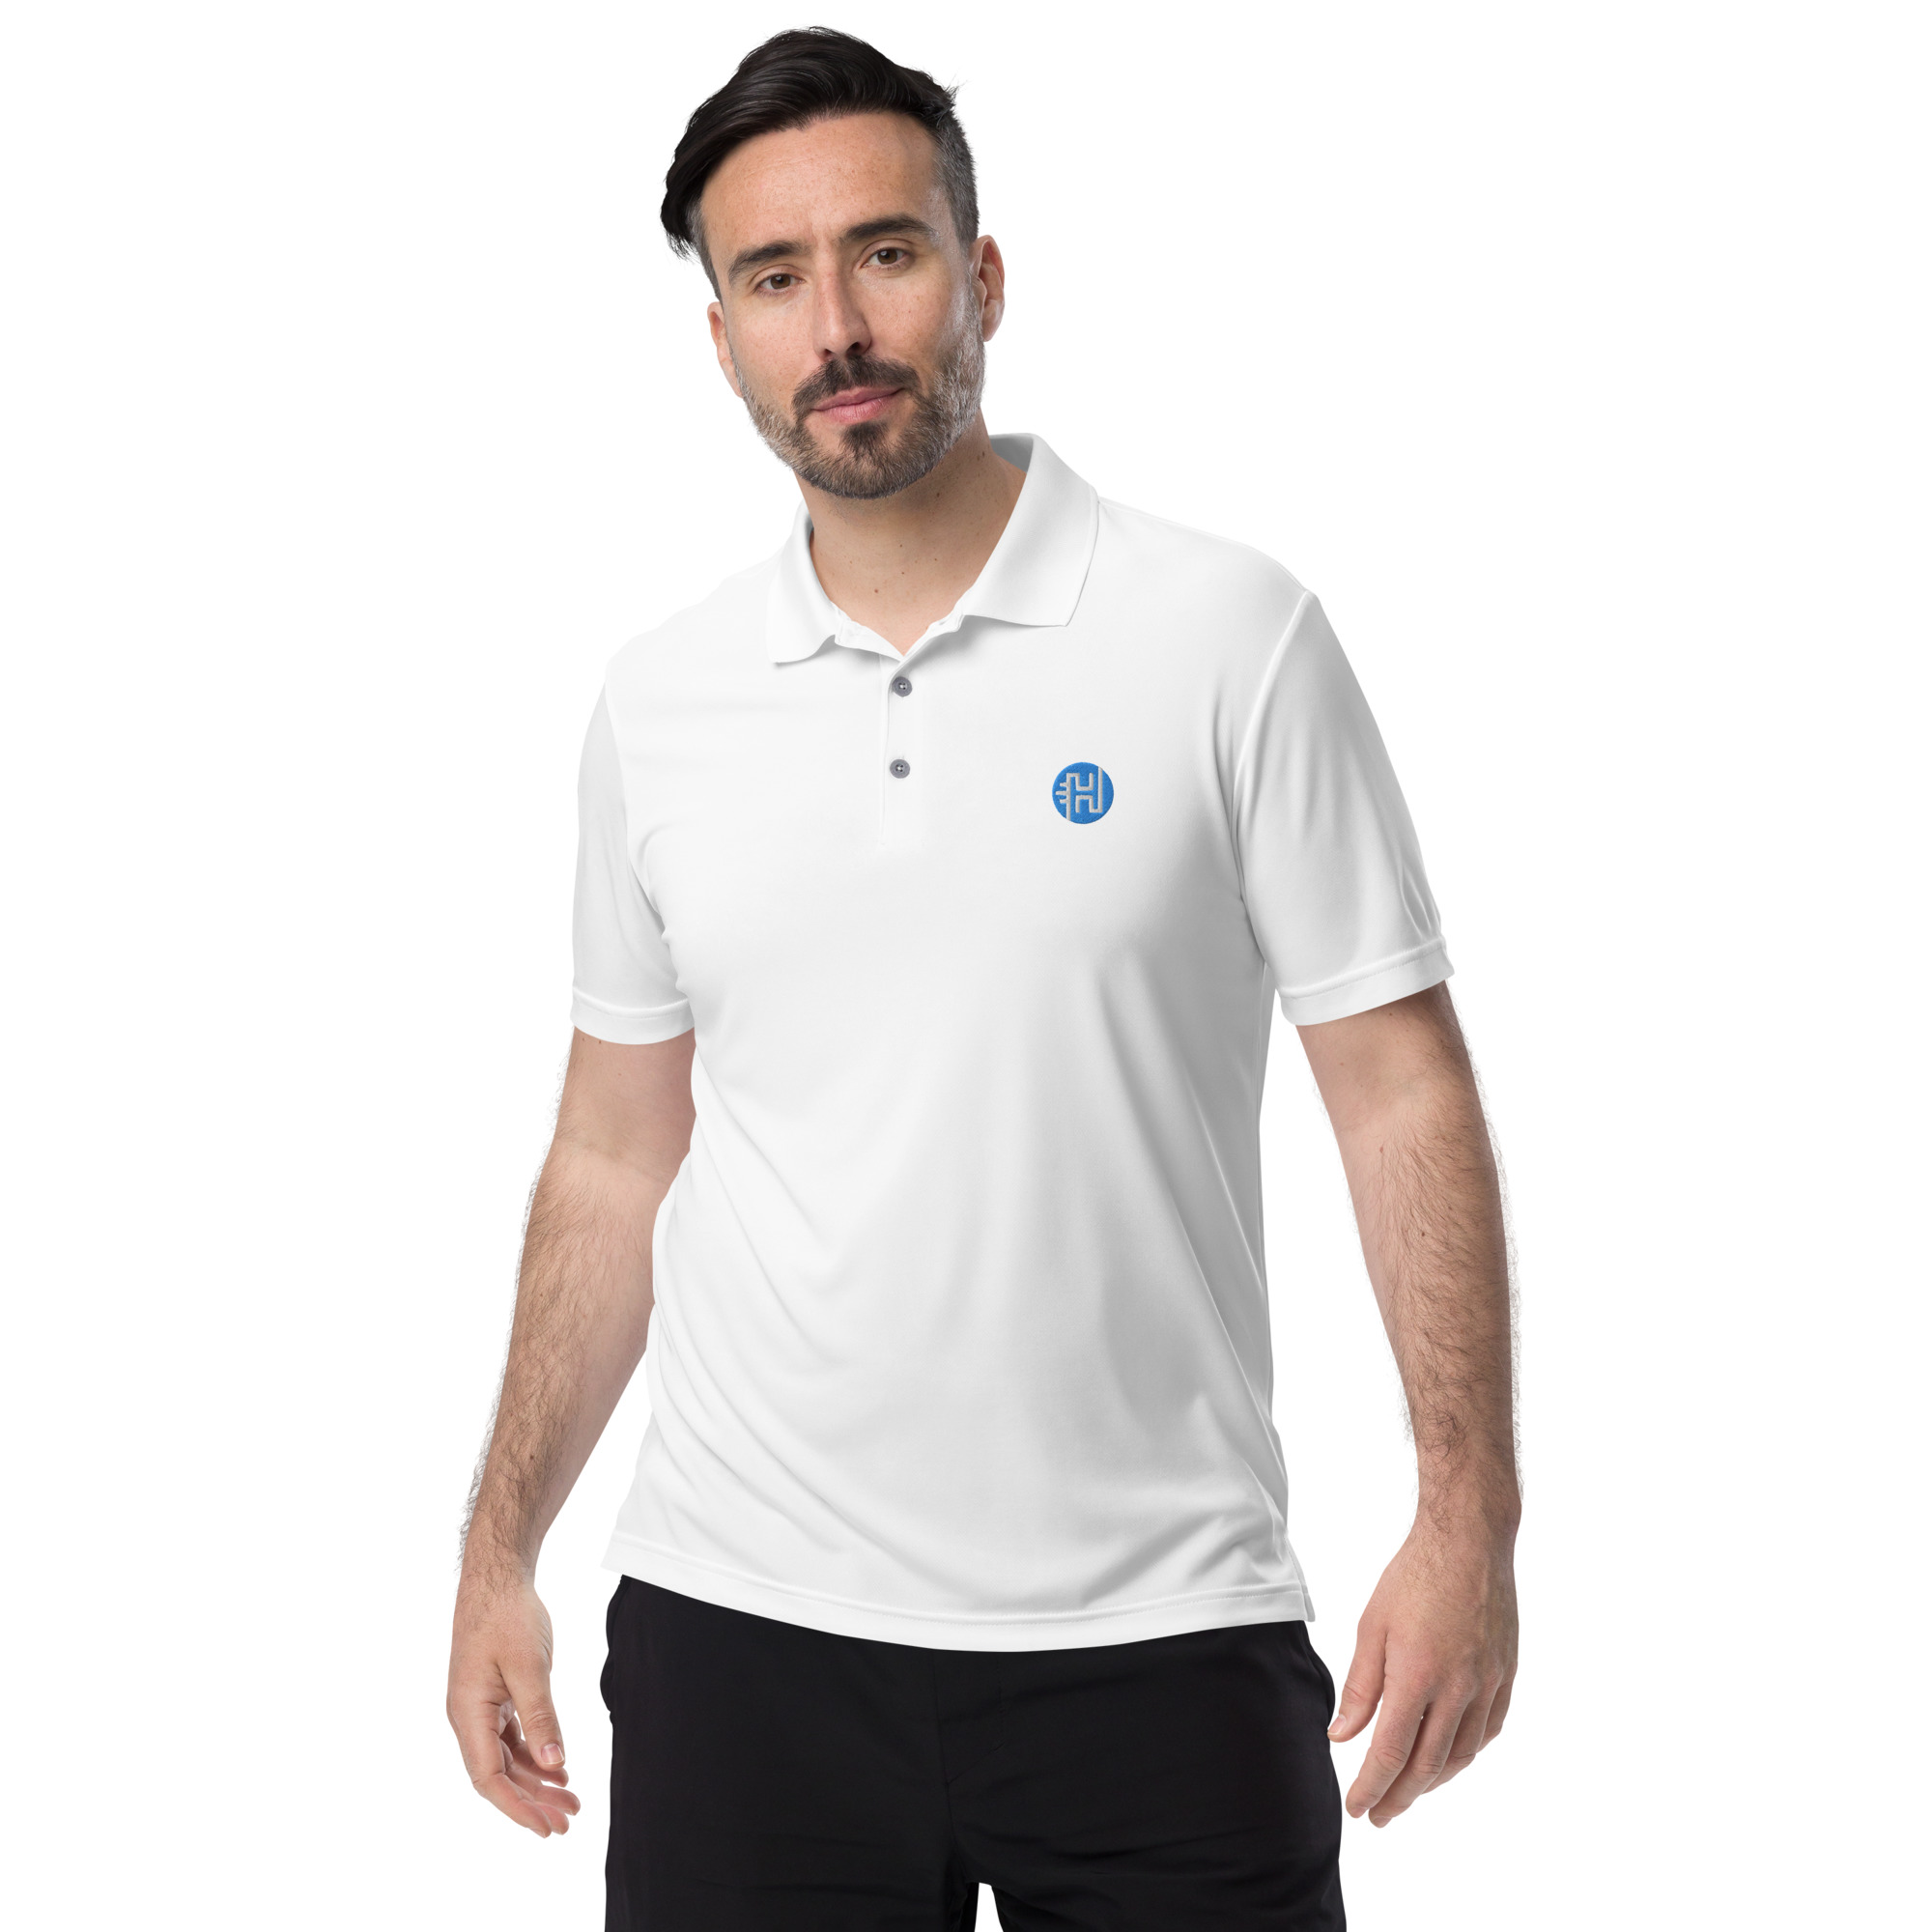 Performance Polo Shirt - HODL Store - Where HODLERS get their Merch